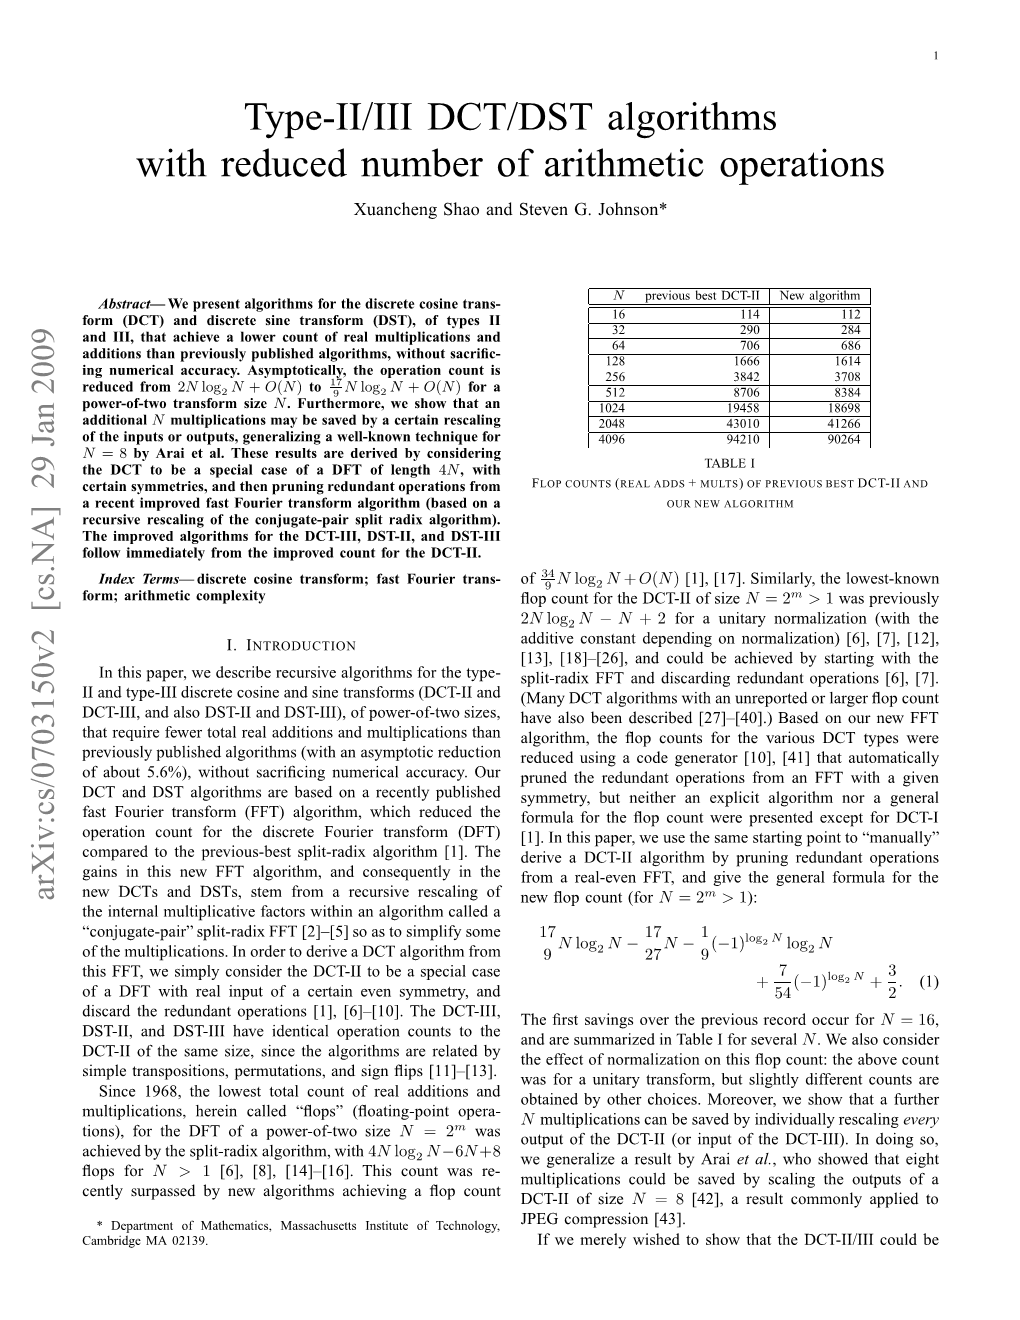 Type-II/III DCT/DST Algorithms with Reduced Number of Arithmetic